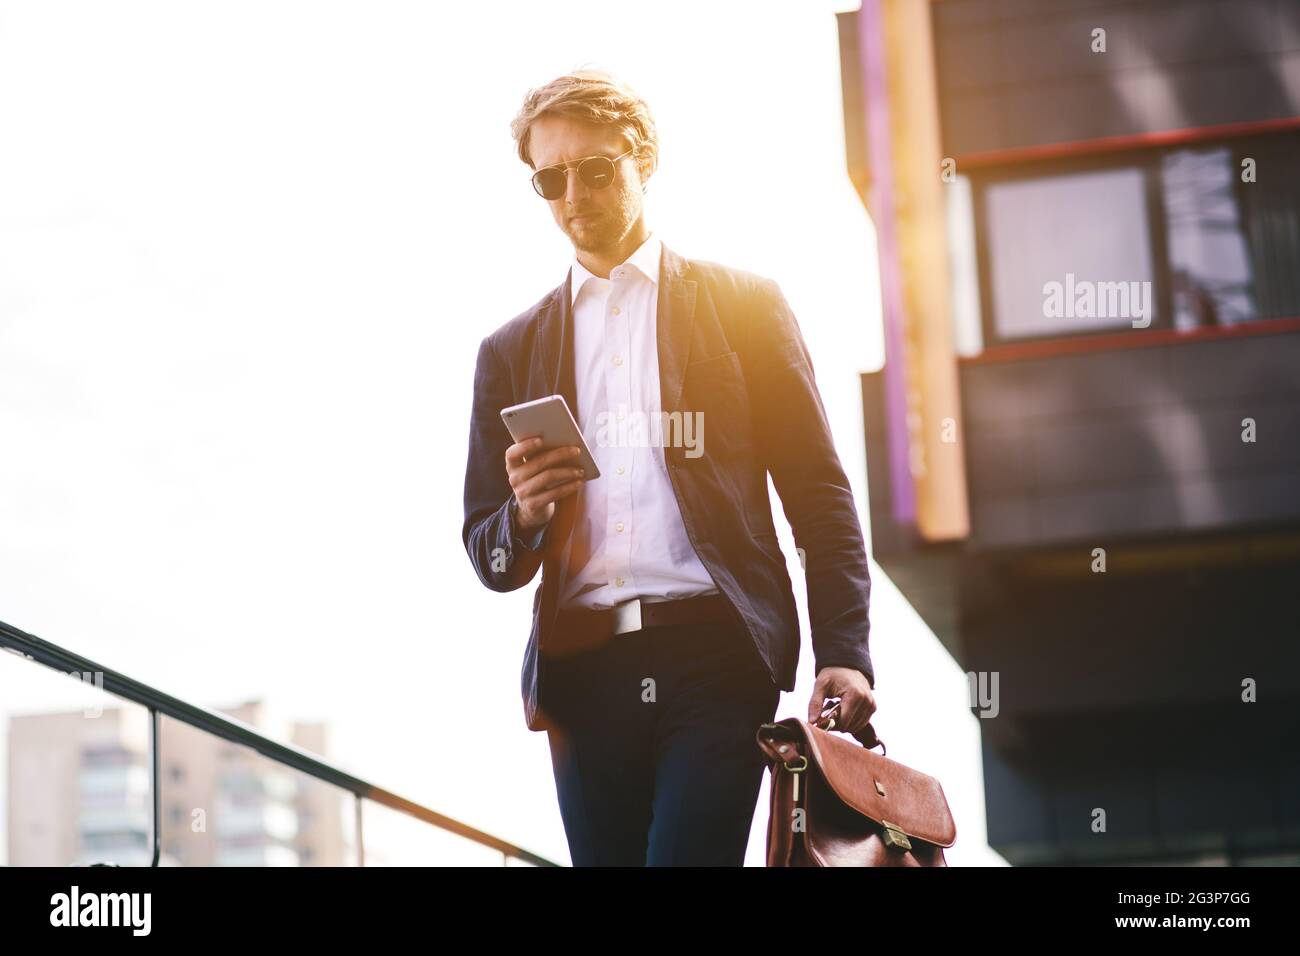 A Businessman Received A Message On His Mobile Phone On His Way To Work Stock Photo